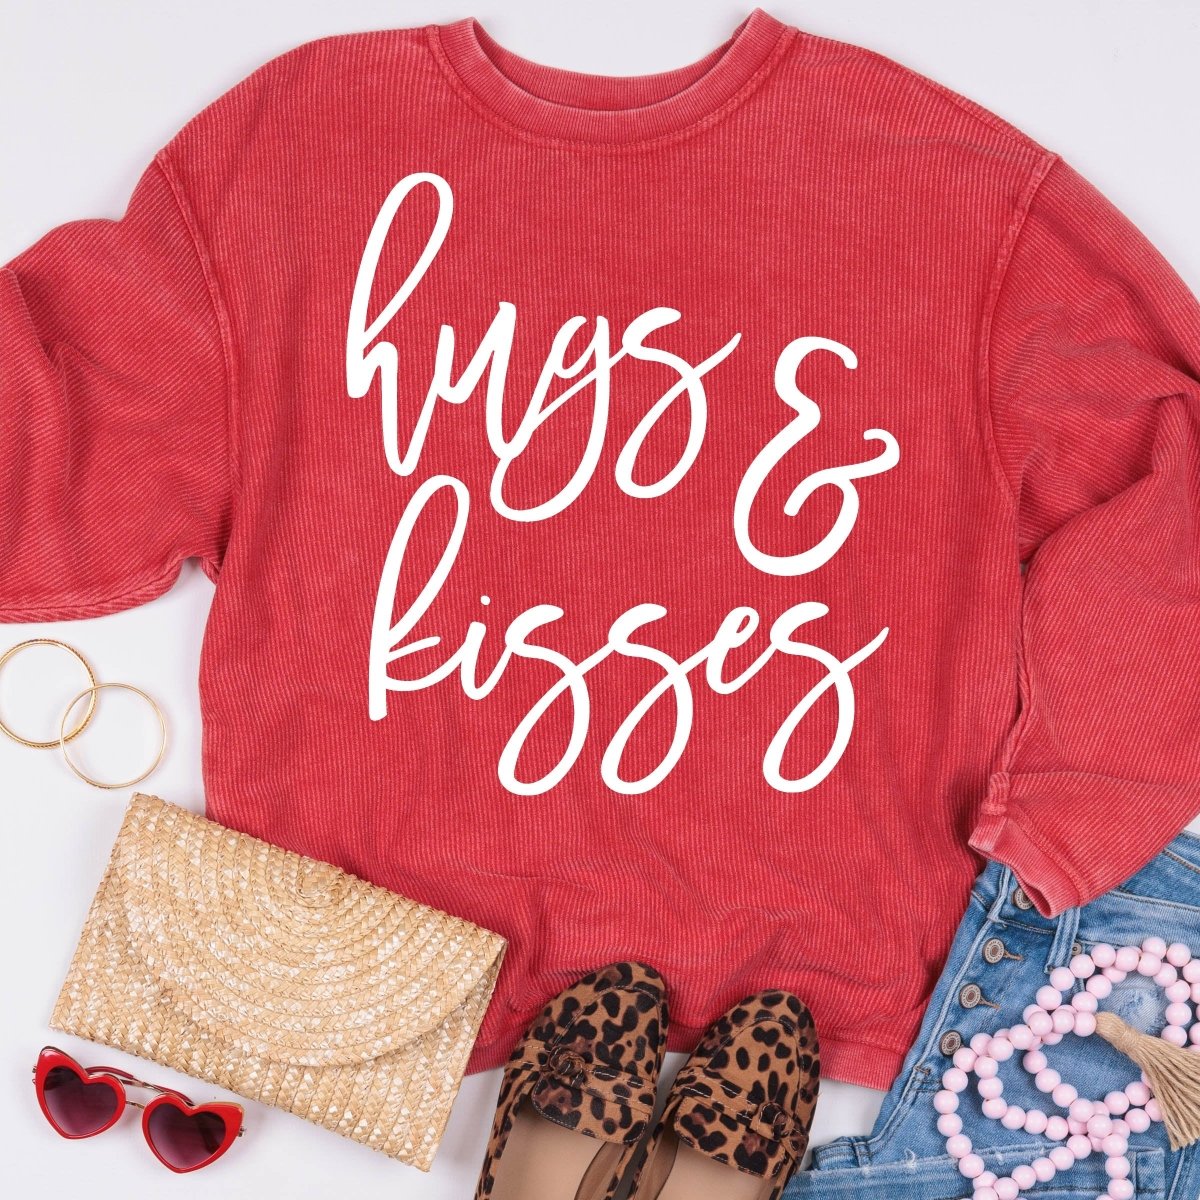 Hugs and Kisses Wholesale Corded Crew - Limeberry Designs